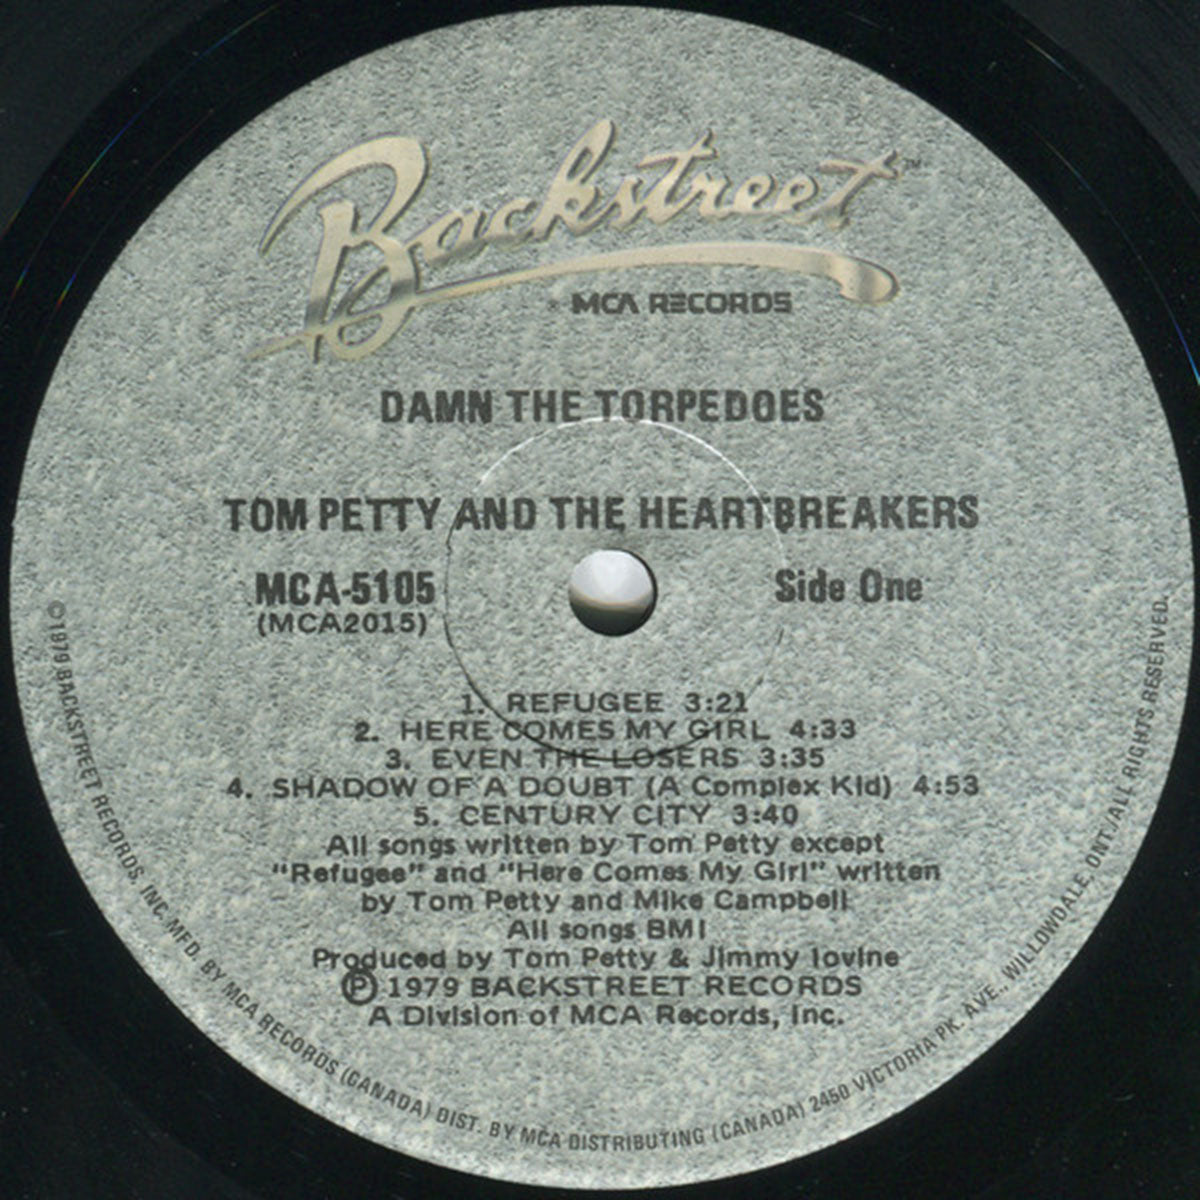 Tom Petty And The Heartbreakers ‎– Damn The Torpedoes - 1979 Original! (Copy)